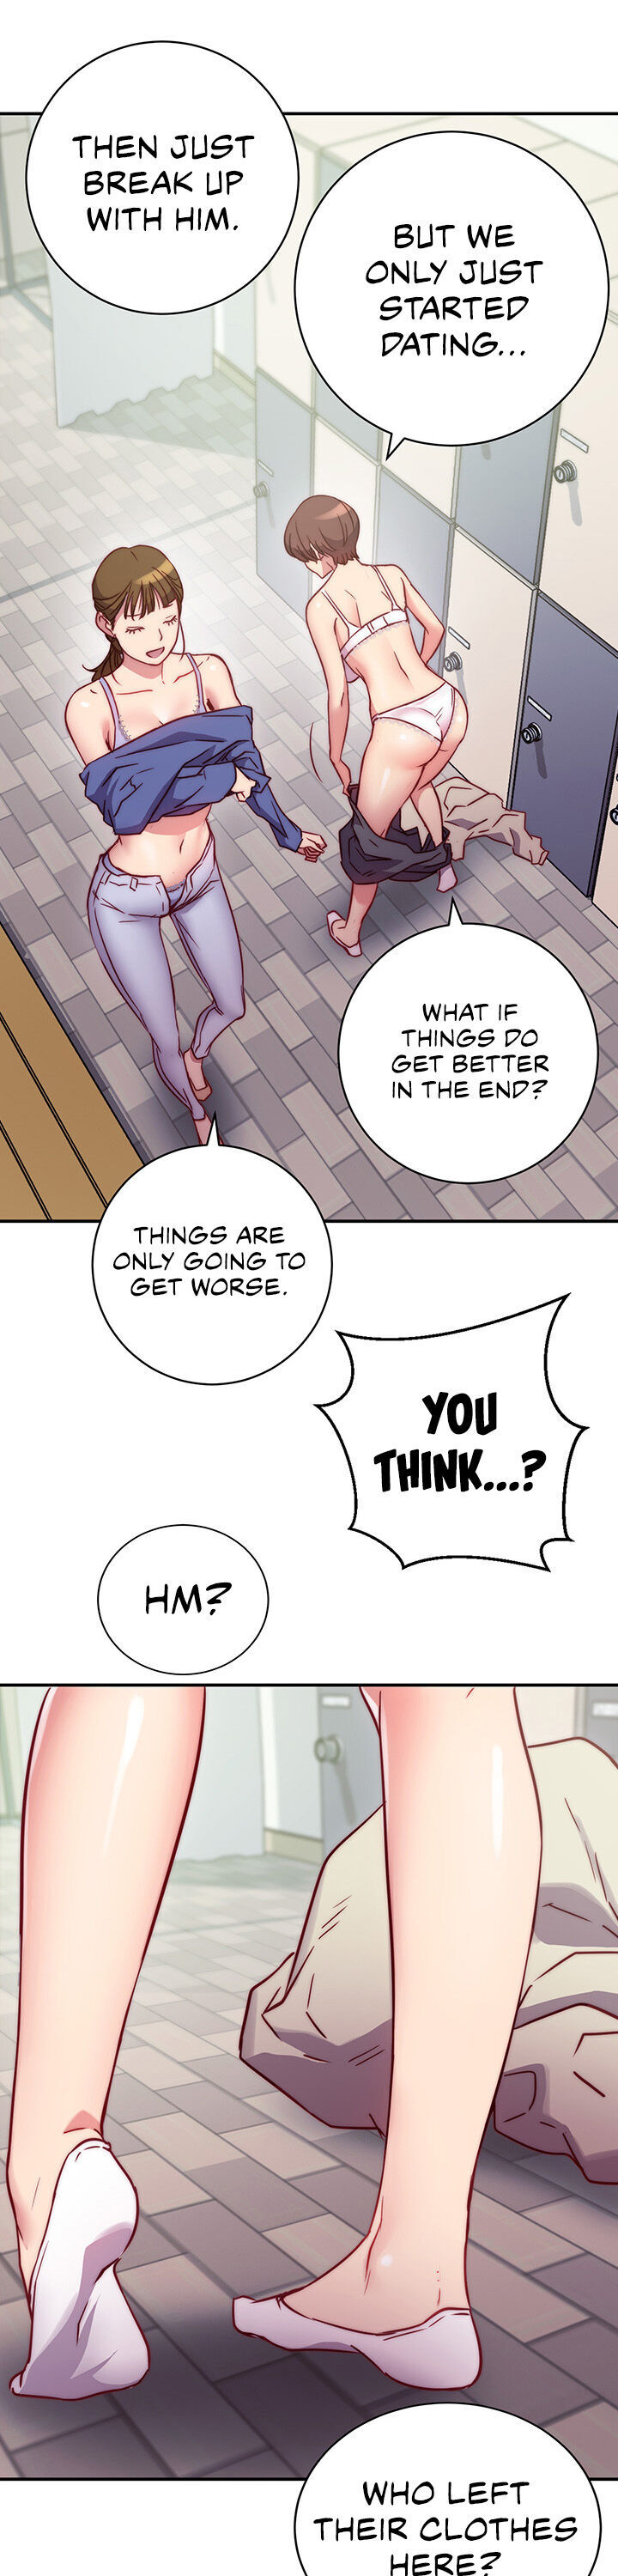 How About This Pose? - Chapter 2 Page 1